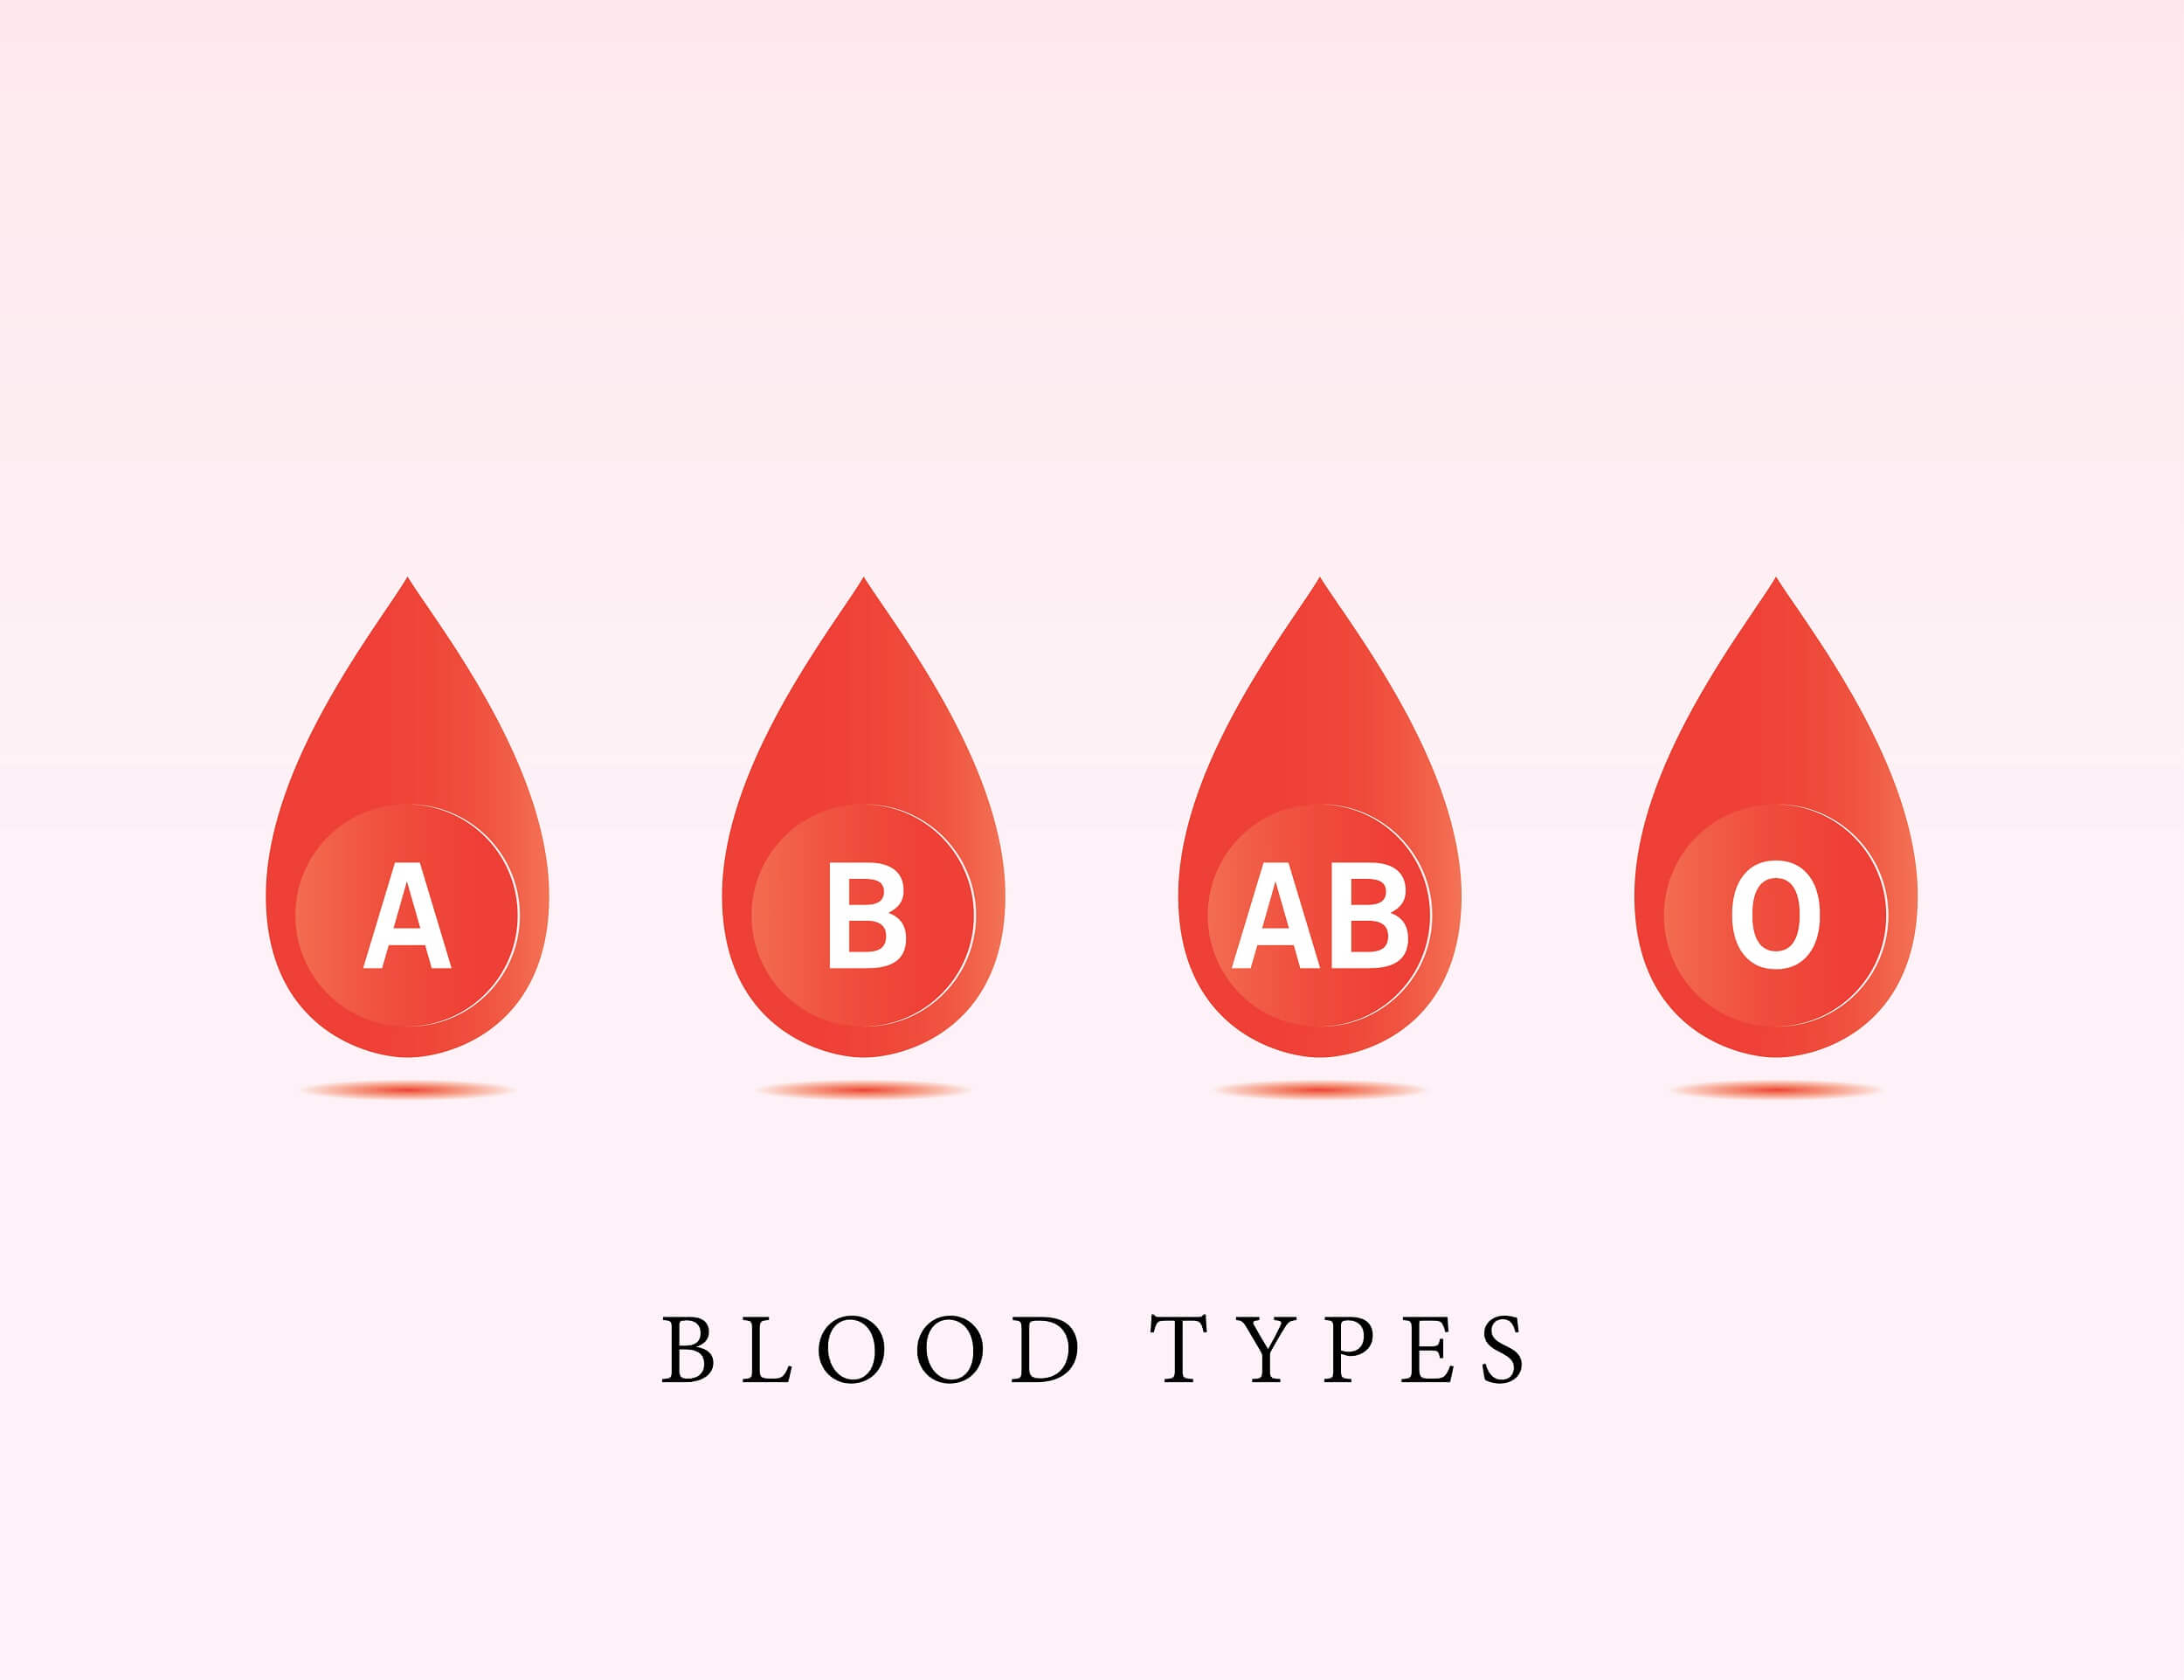 How Does Blood Type Impact Your Risk of Dementia?